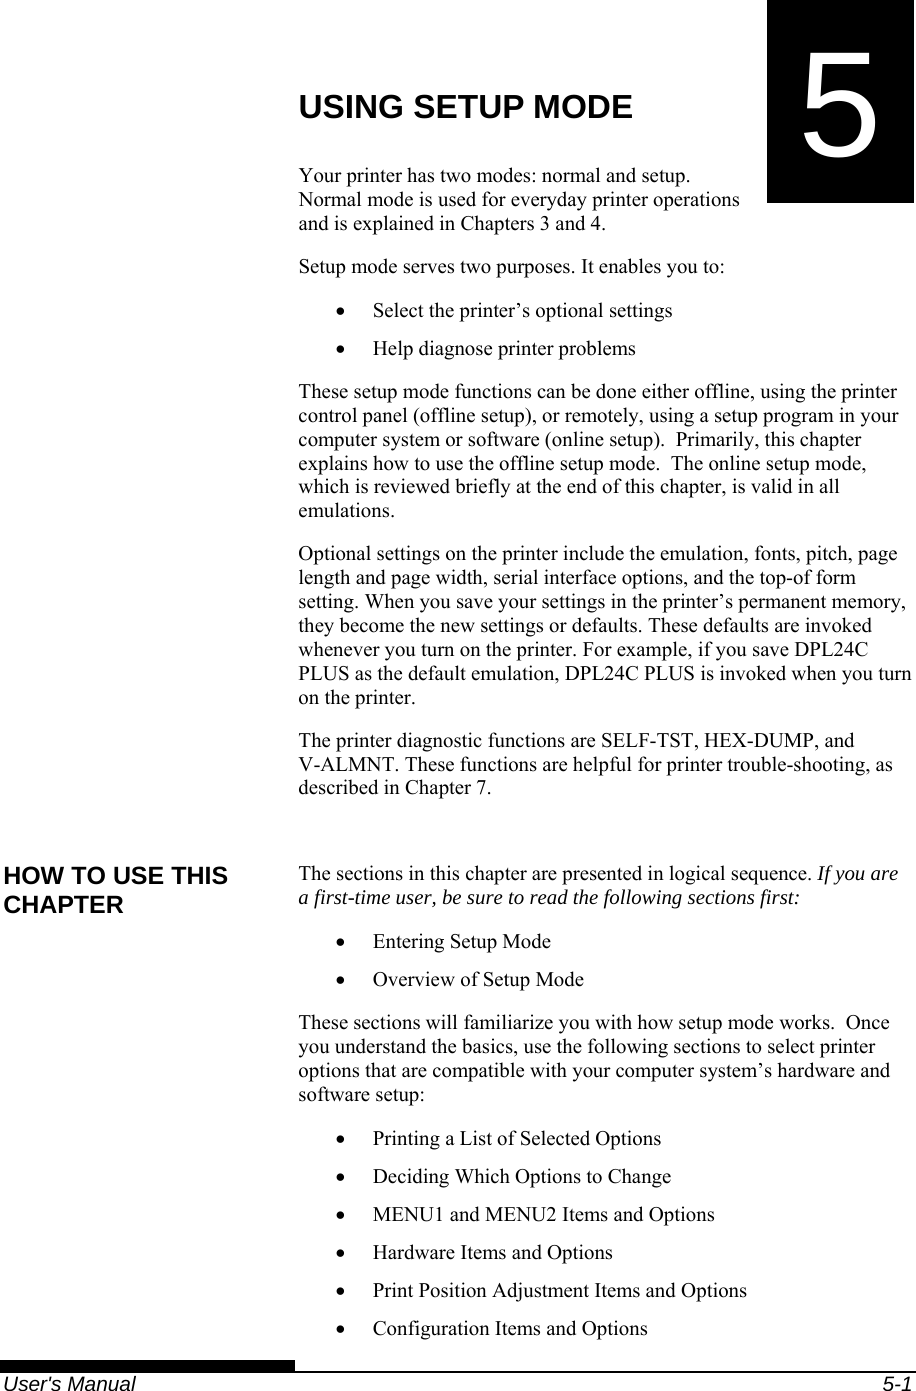   User&apos;s Manual  5-1 5 CHAPTER 5  USING SETUP MODE USING SETUP MODE Your printer has two modes: normal and setup. Normal mode is used for everyday printer operations and is explained in Chapters 3 and 4. Setup mode serves two purposes. It enables you to: •  Select the printer’s optional settings •  Help diagnose printer problems These setup mode functions can be done either offline, using the printer control panel (offline setup), or remotely, using a setup program in your computer system or software (online setup).  Primarily, this chapter explains how to use the offline setup mode.  The online setup mode, which is reviewed briefly at the end of this chapter, is valid in all emulations. Optional settings on the printer include the emulation, fonts, pitch, page length and page width, serial interface options, and the top-of form setting. When you save your settings in the printer’s permanent memory, they become the new settings or defaults. These defaults are invoked whenever you turn on the printer. For example, if you save DPL24C PLUS as the default emulation, DPL24C PLUS is invoked when you turn on the printer. The printer diagnostic functions are SELF-TST, HEX-DUMP, and V-ALMNT. These functions are helpful for printer trouble-shooting, as described in Chapter 7.  The sections in this chapter are presented in logical sequence. If you are a first-time user, be sure to read the following sections first: • Entering Setup Mode •  Overview of Setup Mode These sections will familiarize you with how setup mode works.  Once you understand the basics, use the following sections to select printer options that are compatible with your computer system’s hardware and software setup: •  Printing a List of Selected Options •  Deciding Which Options to Change •  MENU1 and MENU2 Items and Options •  Hardware Items and Options •  Print Position Adjustment Items and Options •  Configuration Items and Options HOW TO USE THIS CHAPTER 